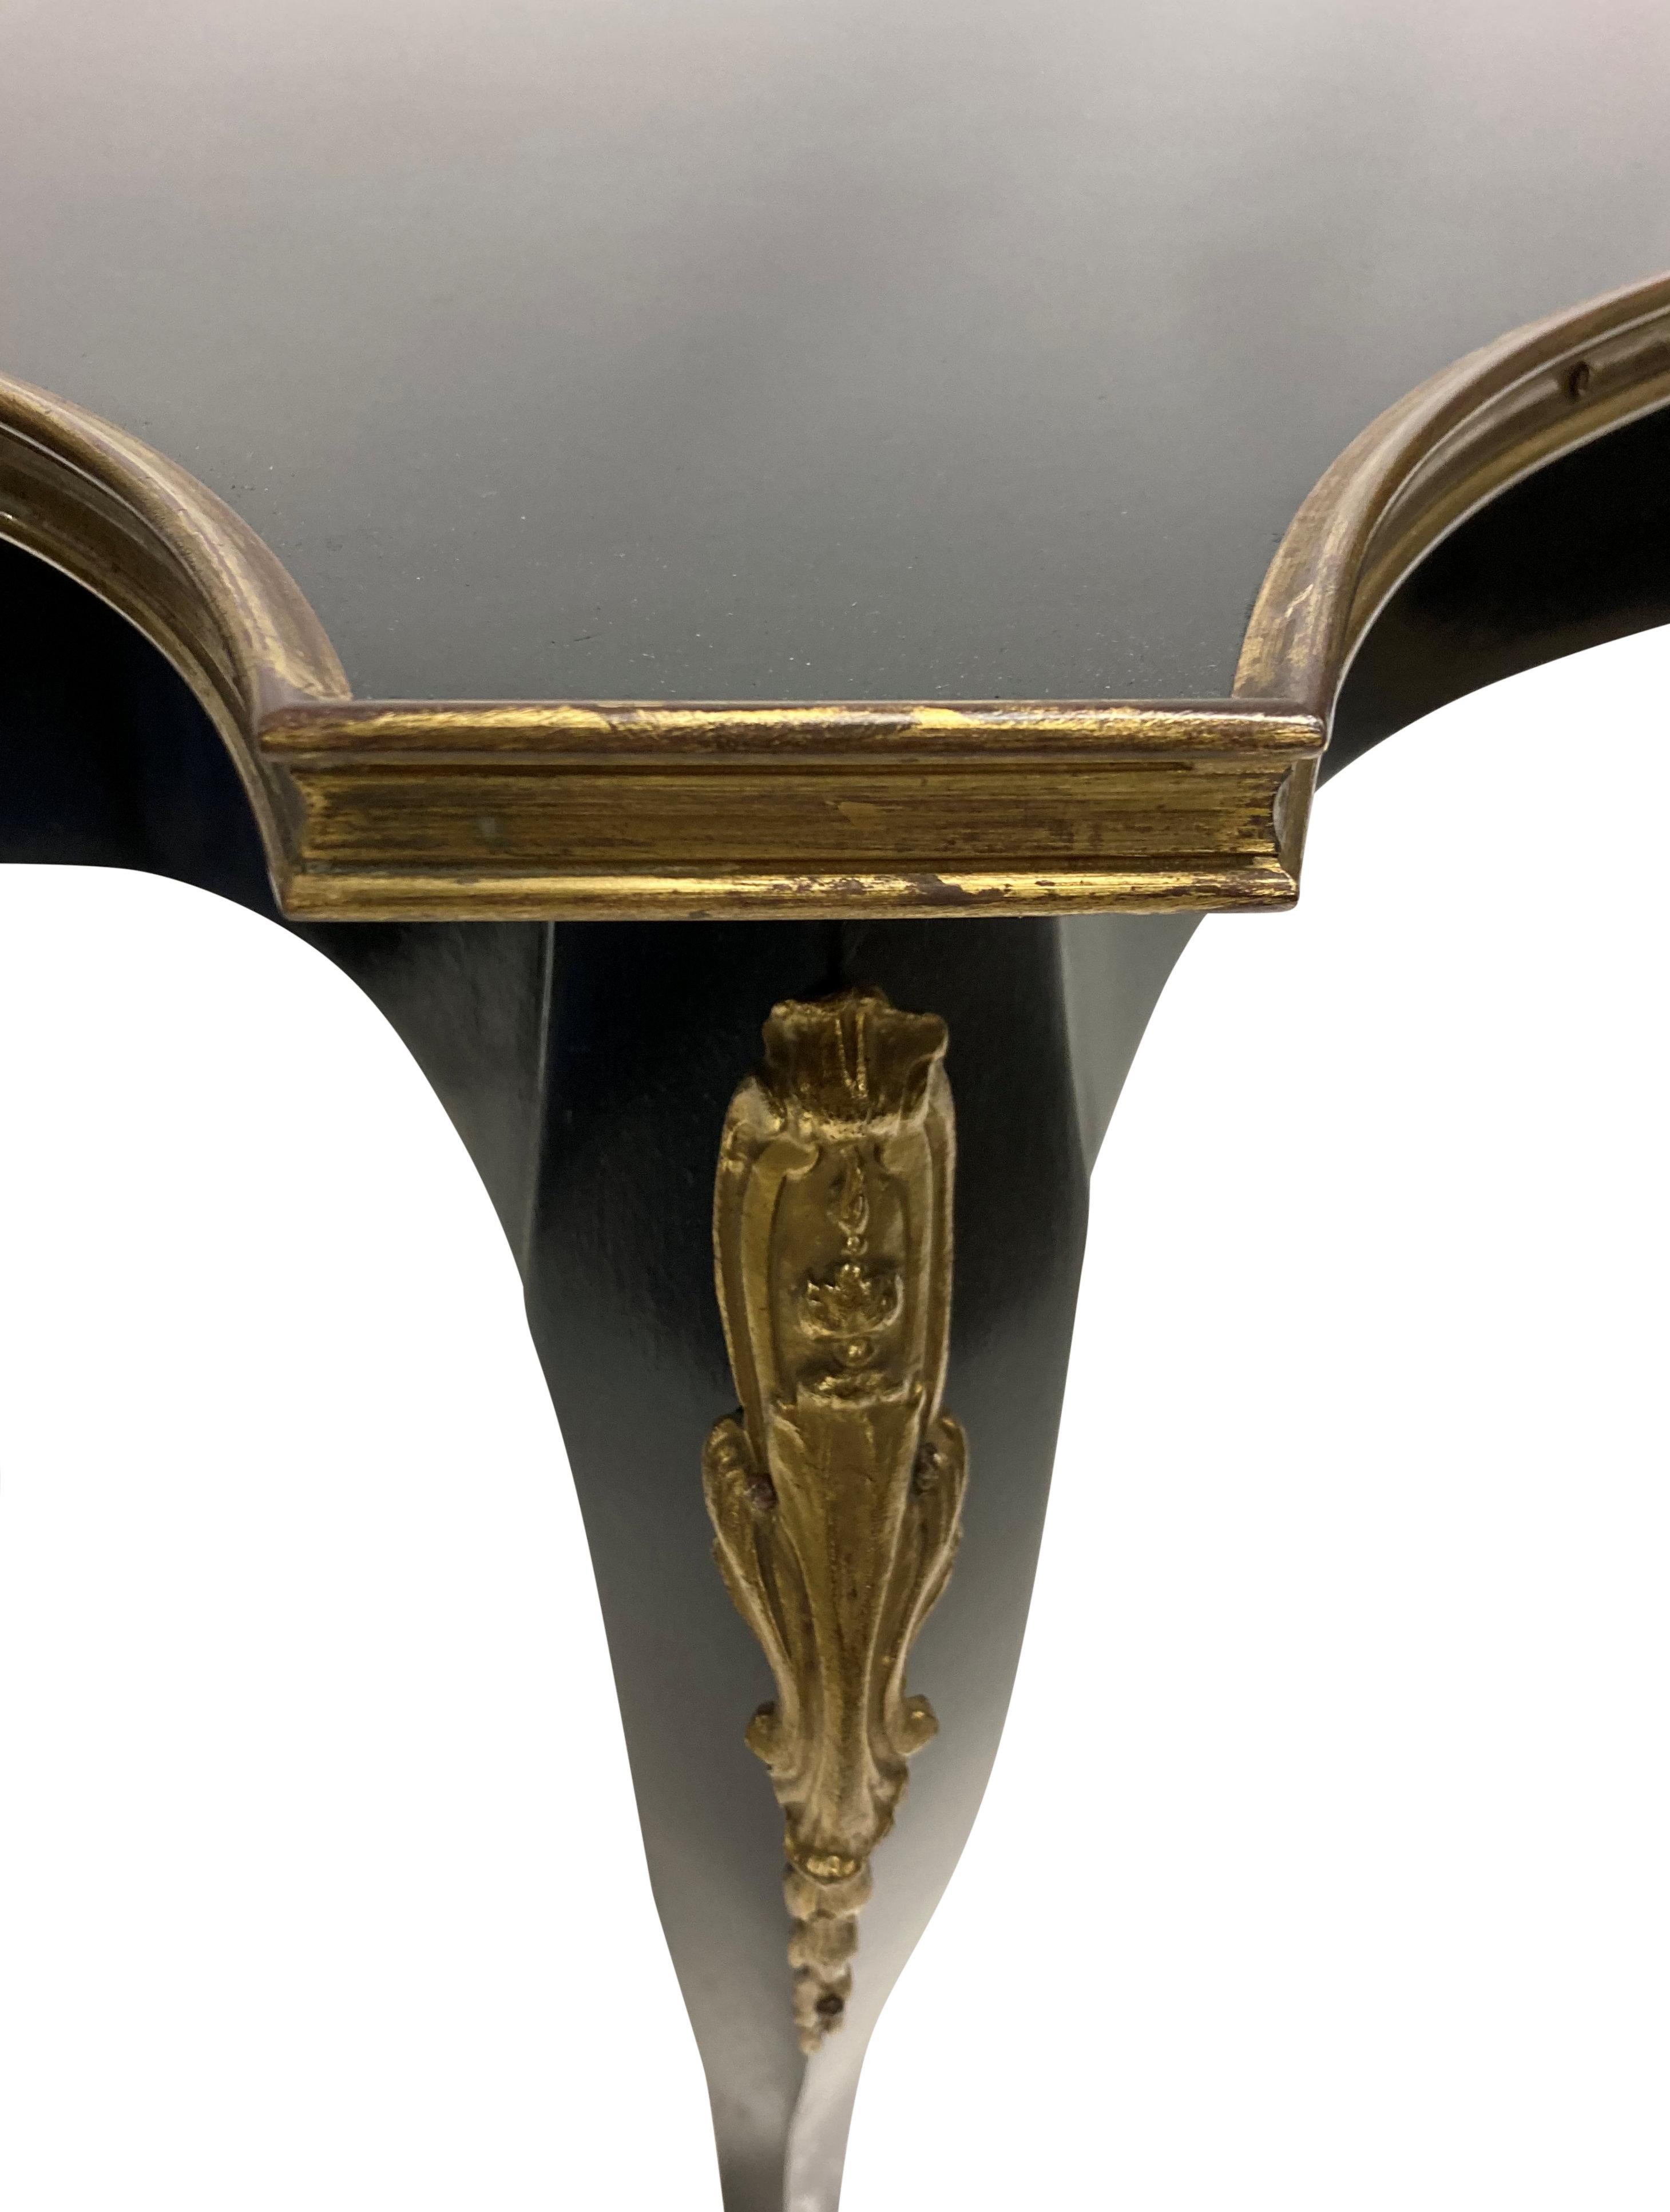 A French black lacquered Louis XV style occasional table with gilt bronze mounts and an inset glass top.